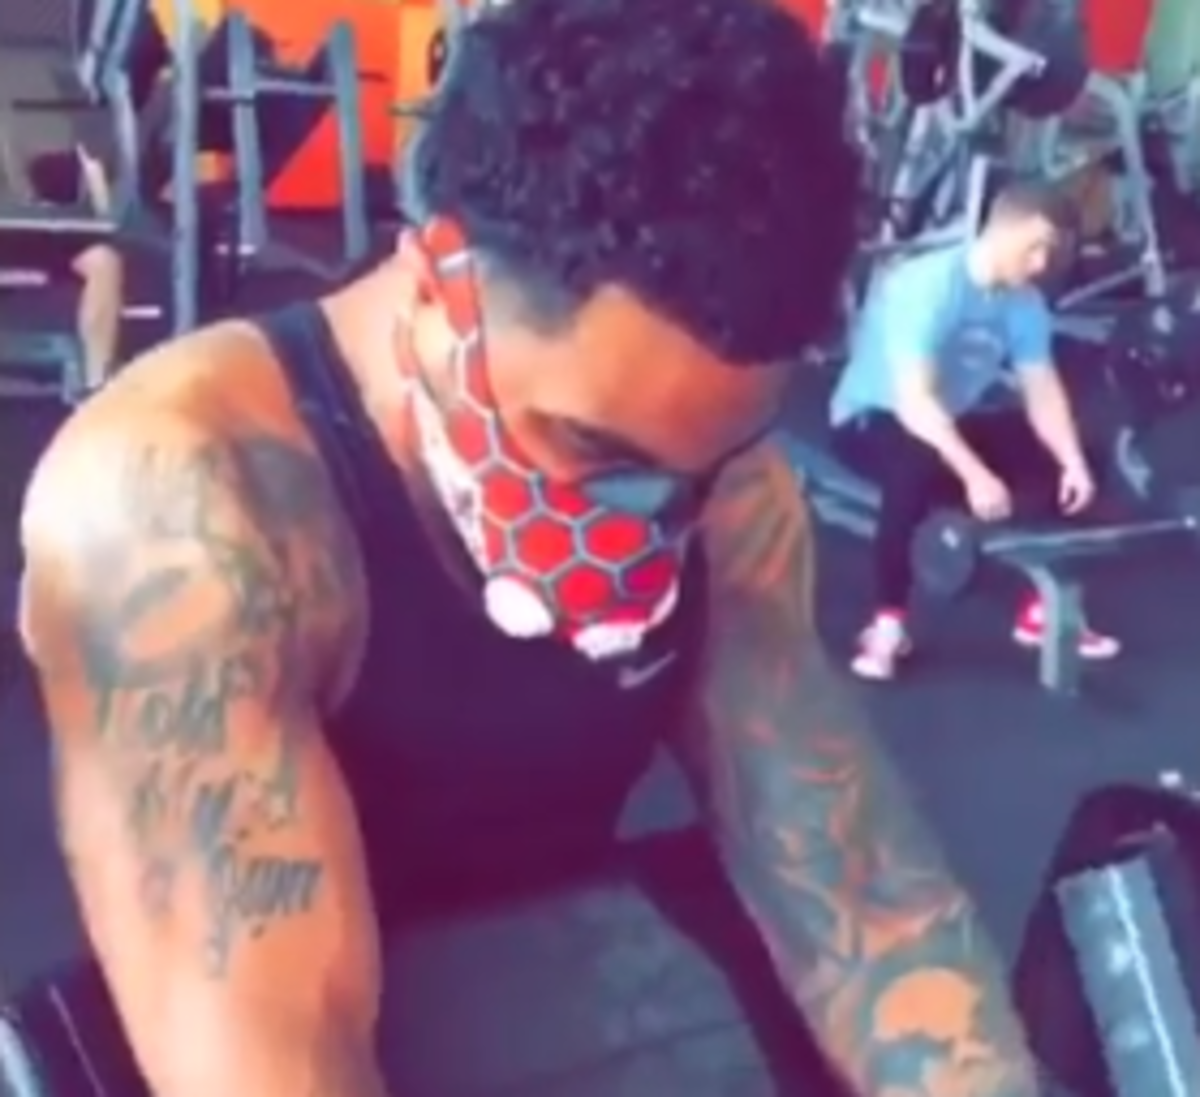 Braxton Miller works out in Bane-style mask.